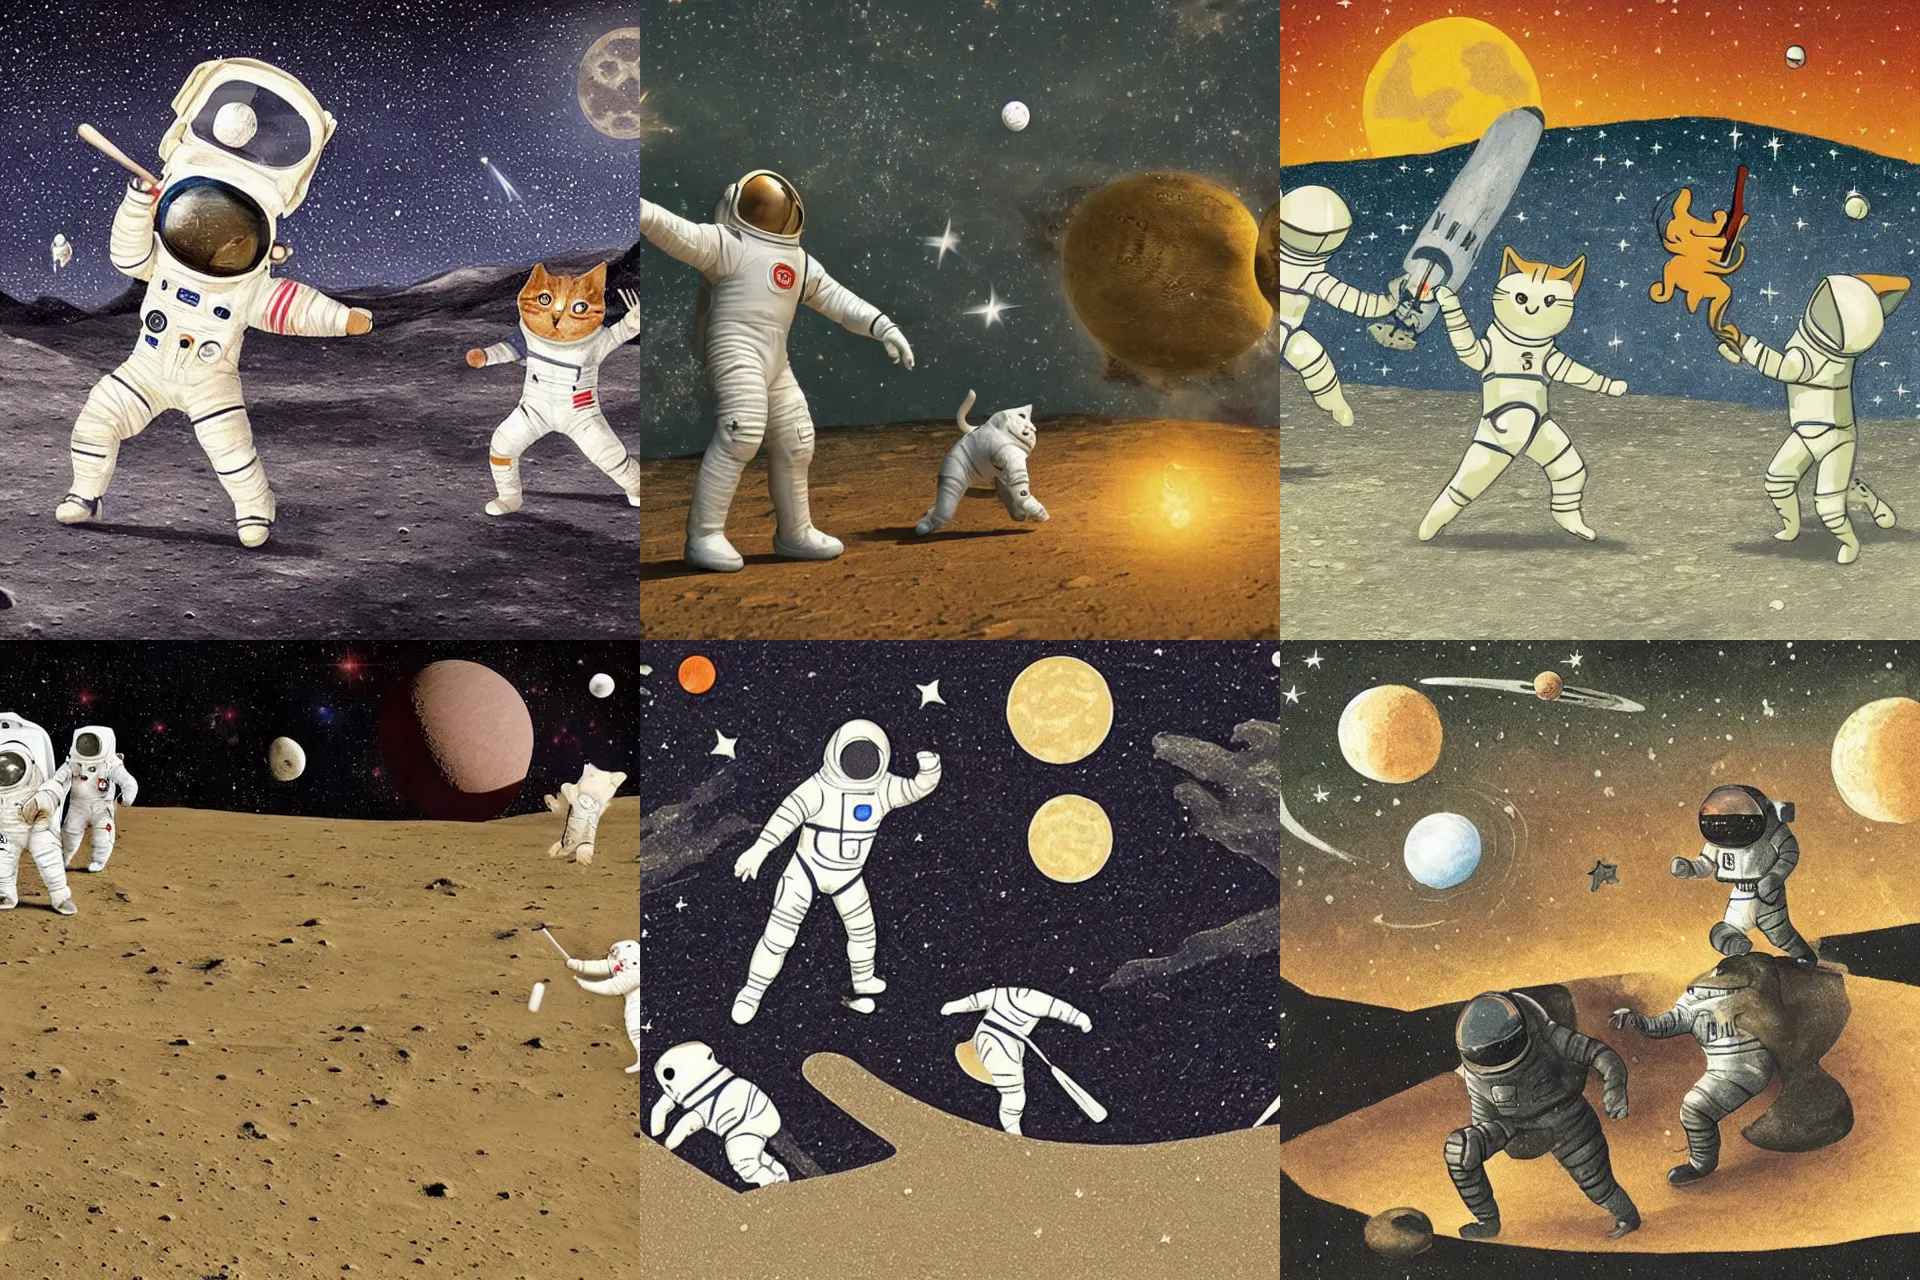 Prompt: A pair of 15th century astronaut cats playing baseball on the surface of the moon with a spaceship and a starry dark sky in the background